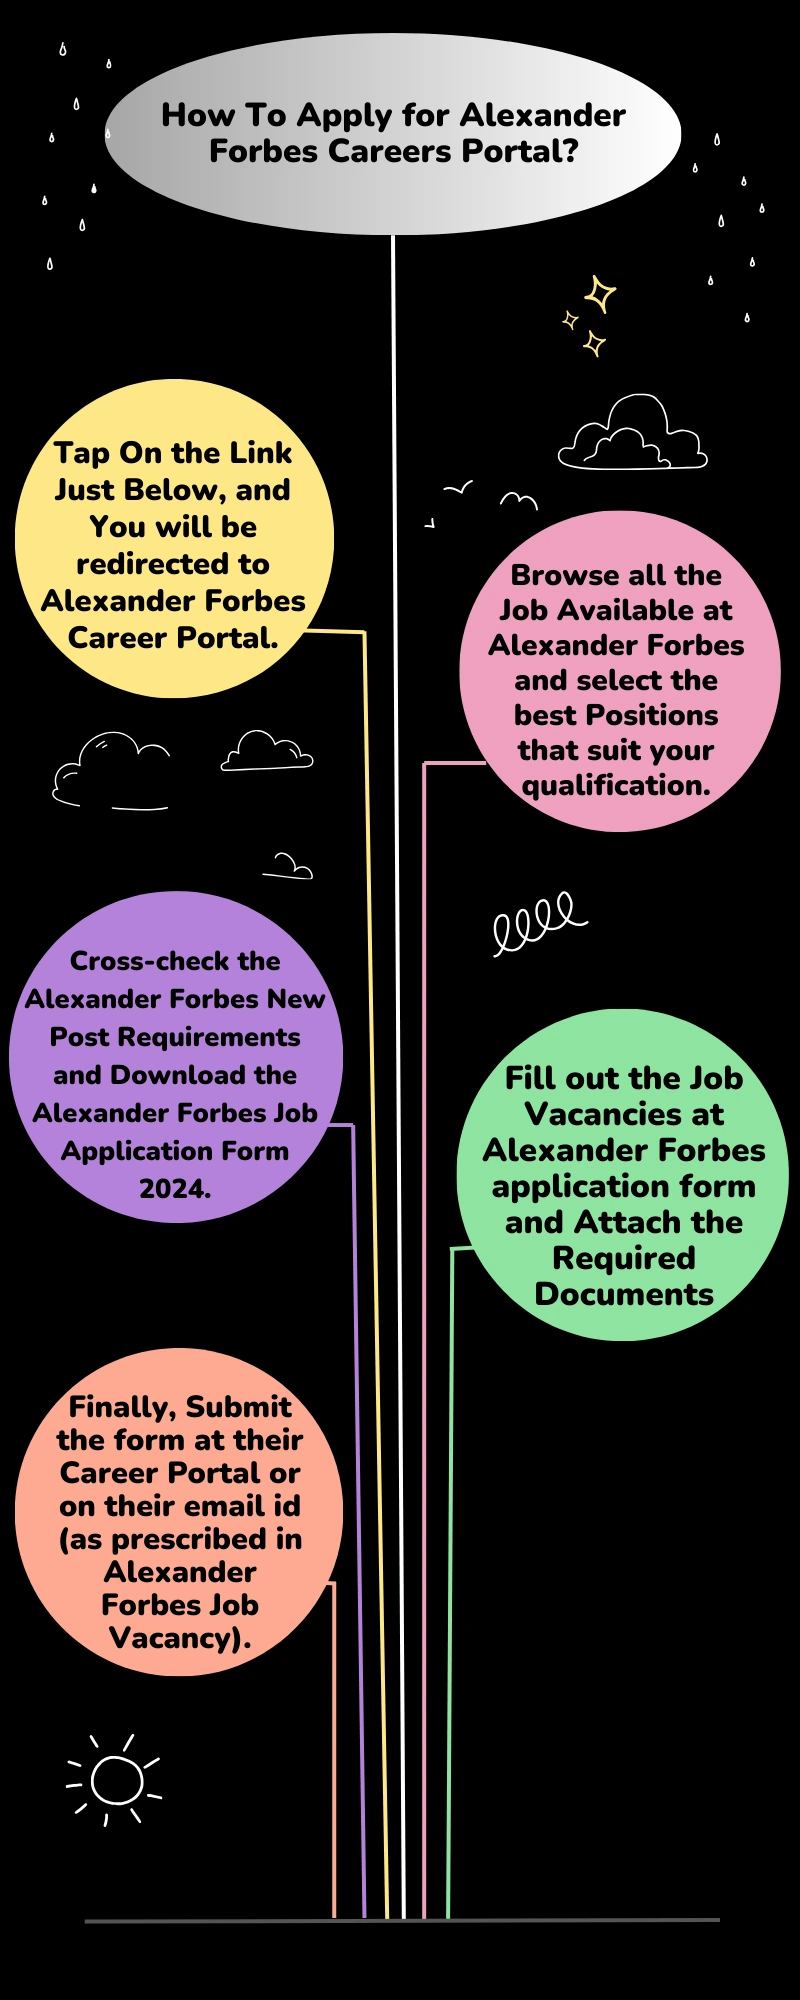 How To Apply for Alexander Forbes Careers Portal?